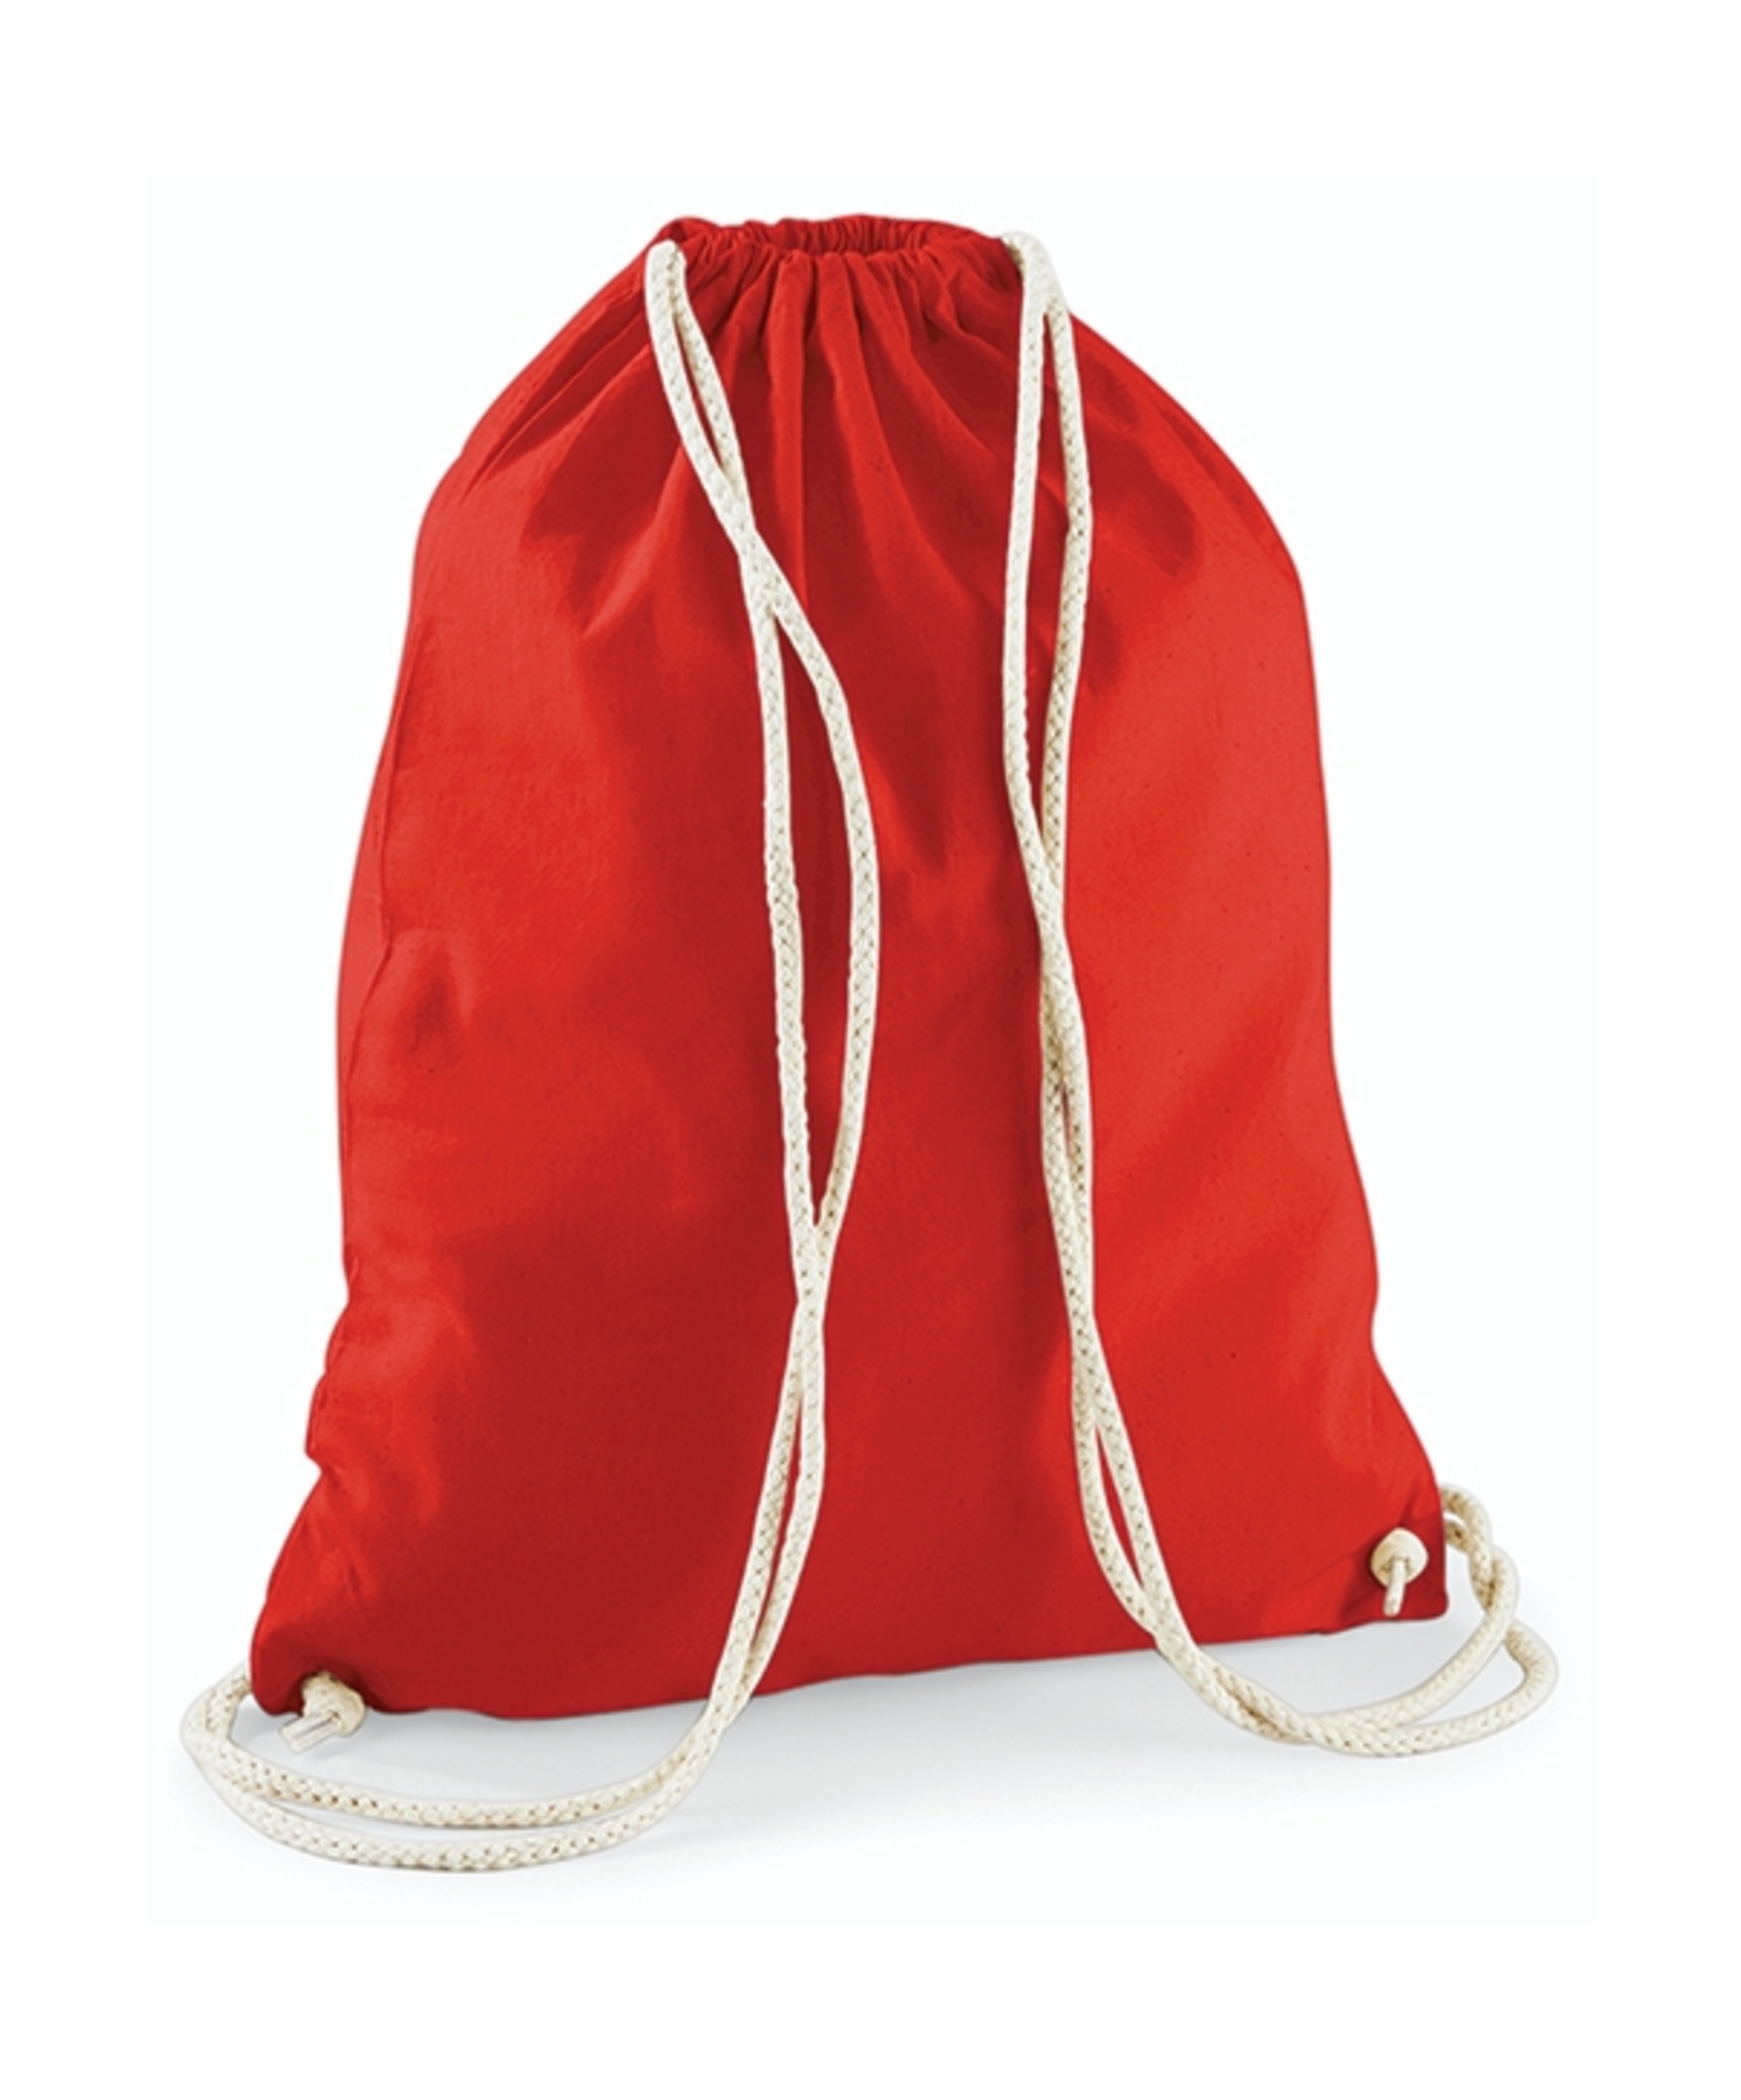 Westford Mill Cotton Gymsack - Bright Red - One Size